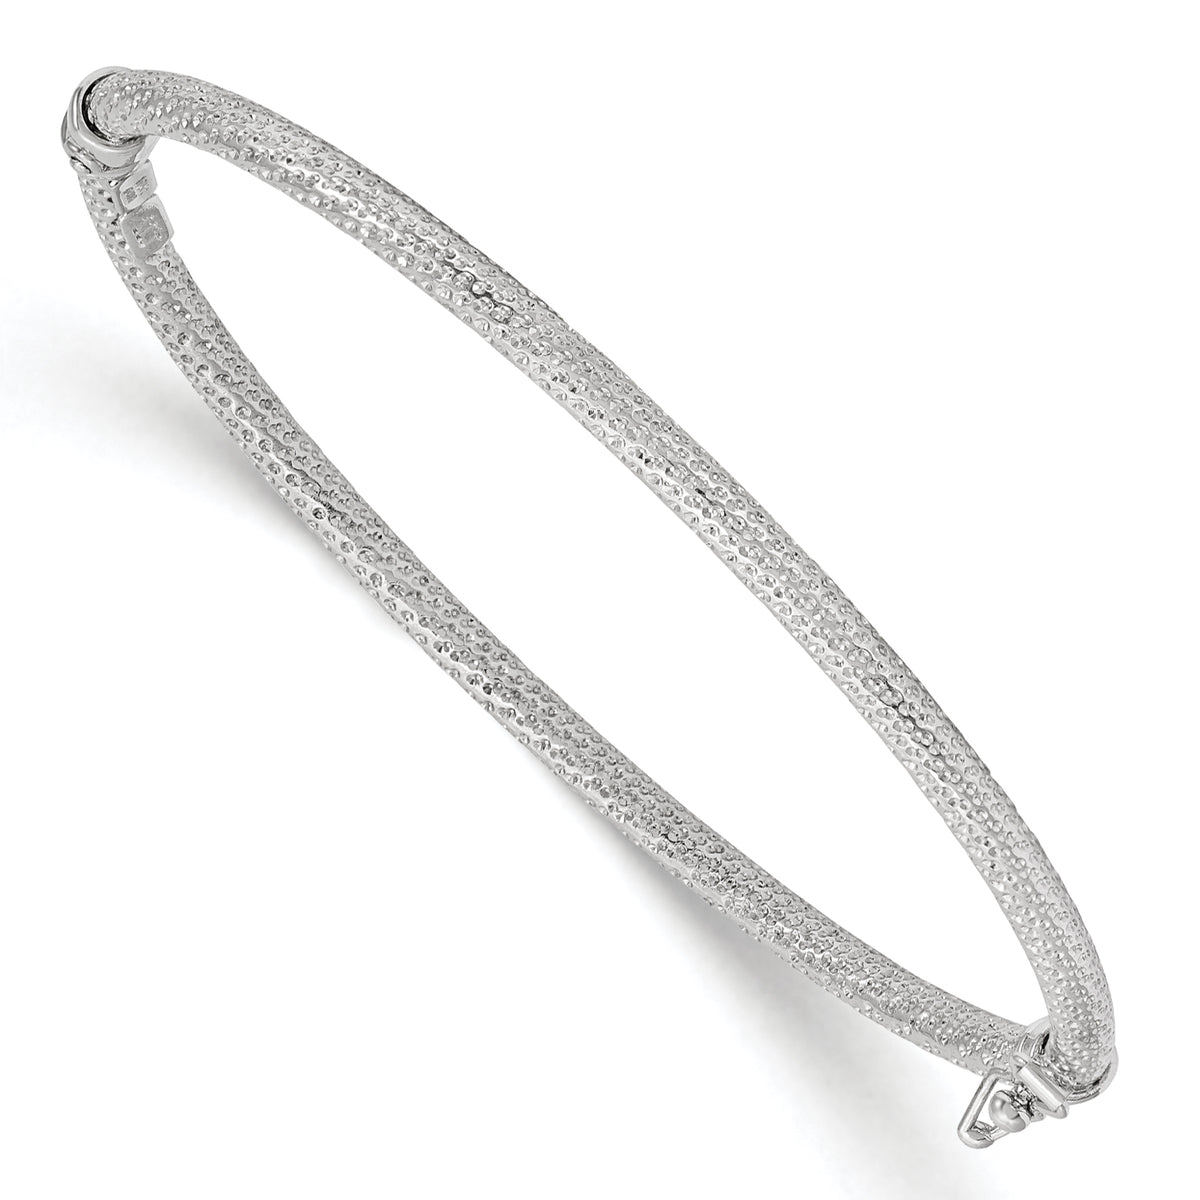 Leslie's 10K White Gold Polished and Textured Hinged Bangle